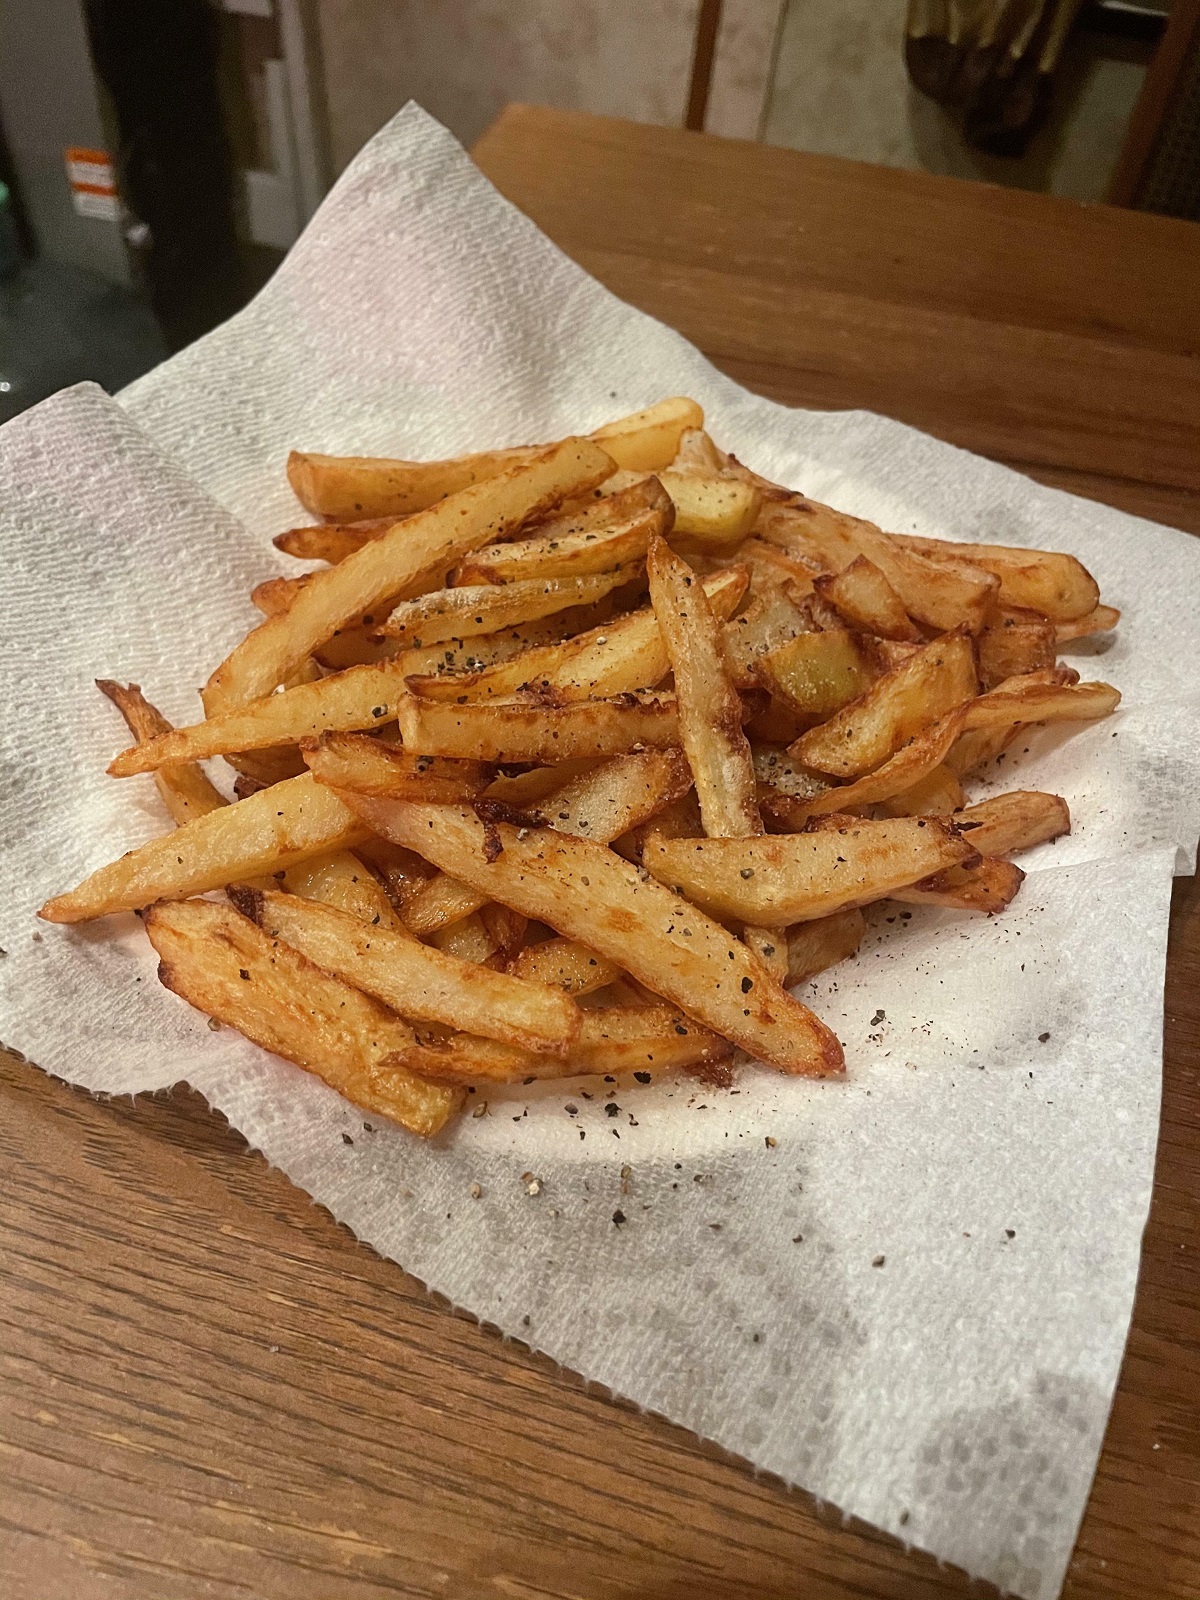 I'm 15, And I Just Cooked My First Batch Of French Fries. They Were Delicious